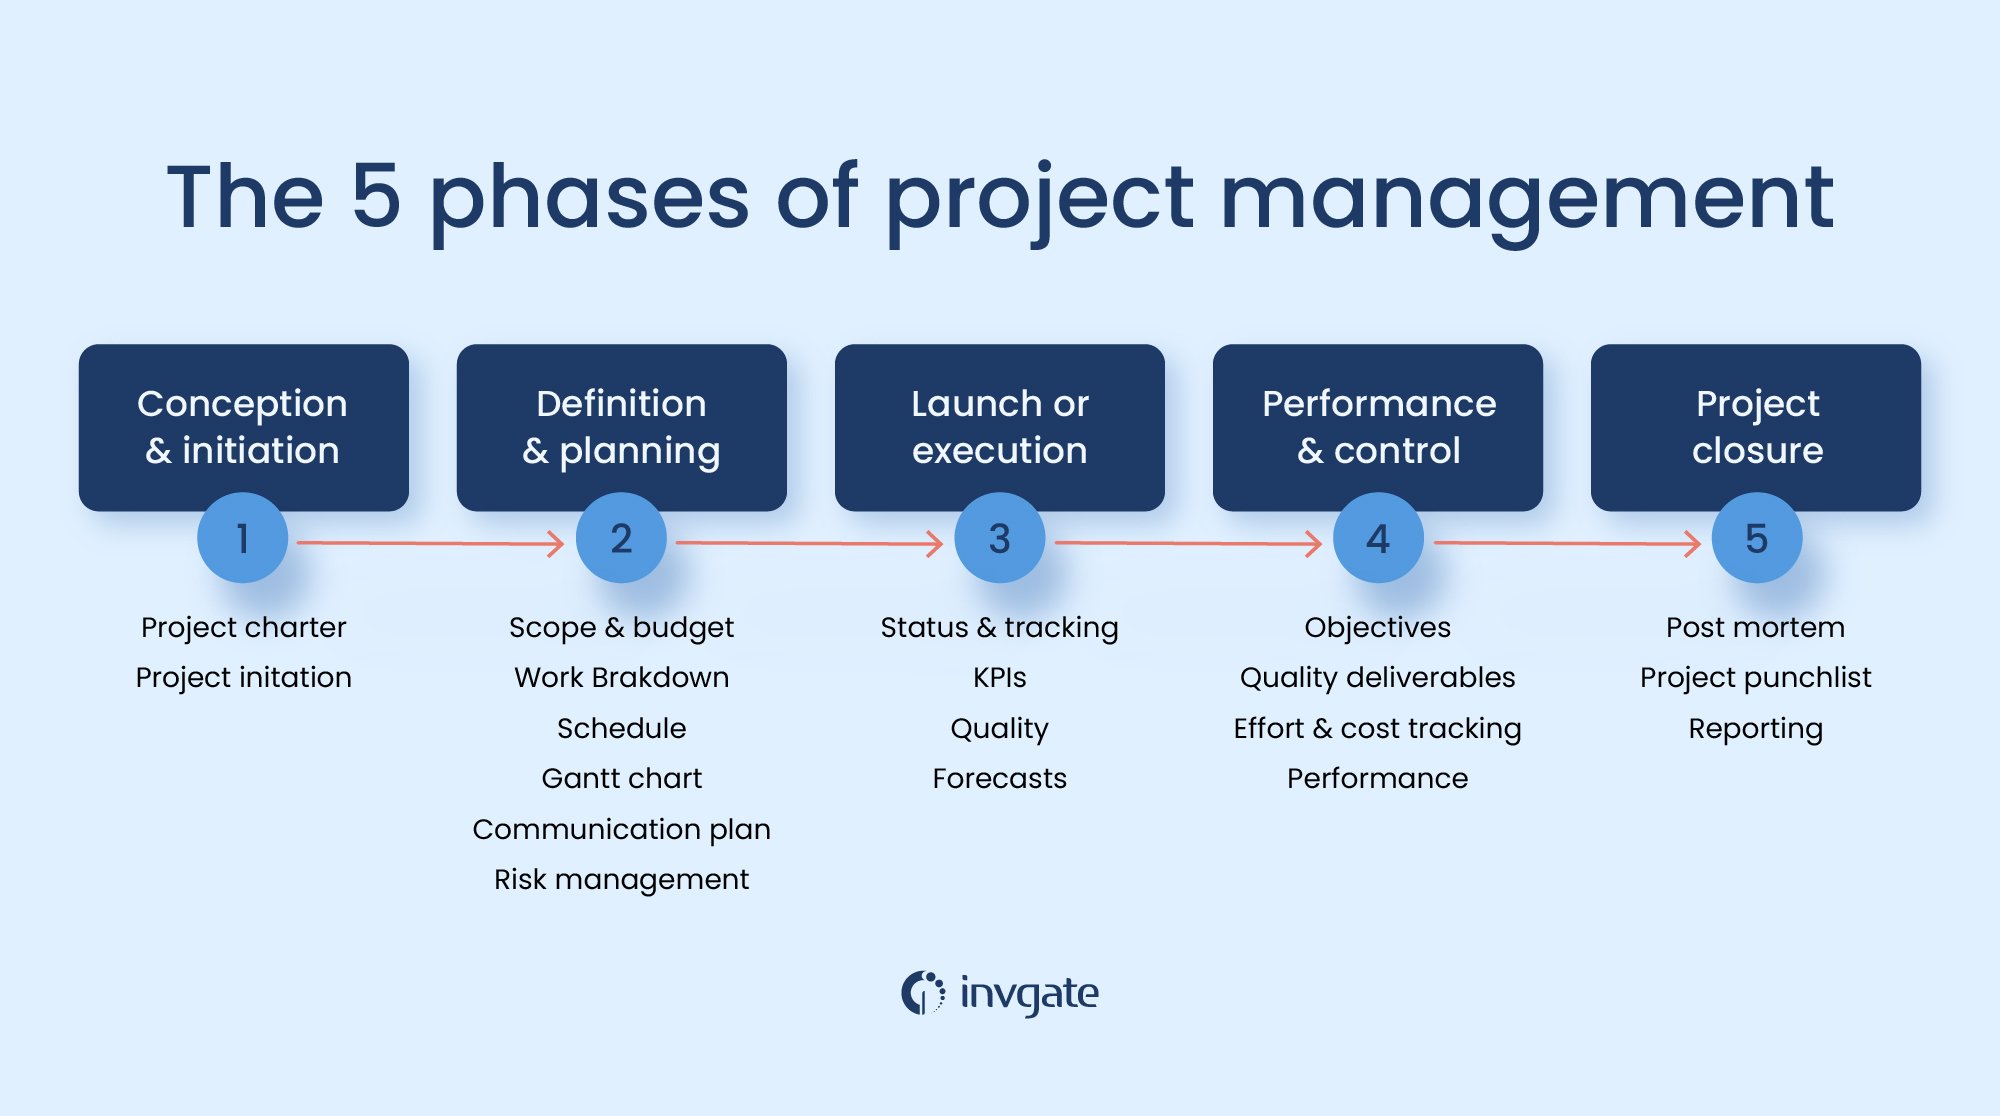 The five phases of project management.